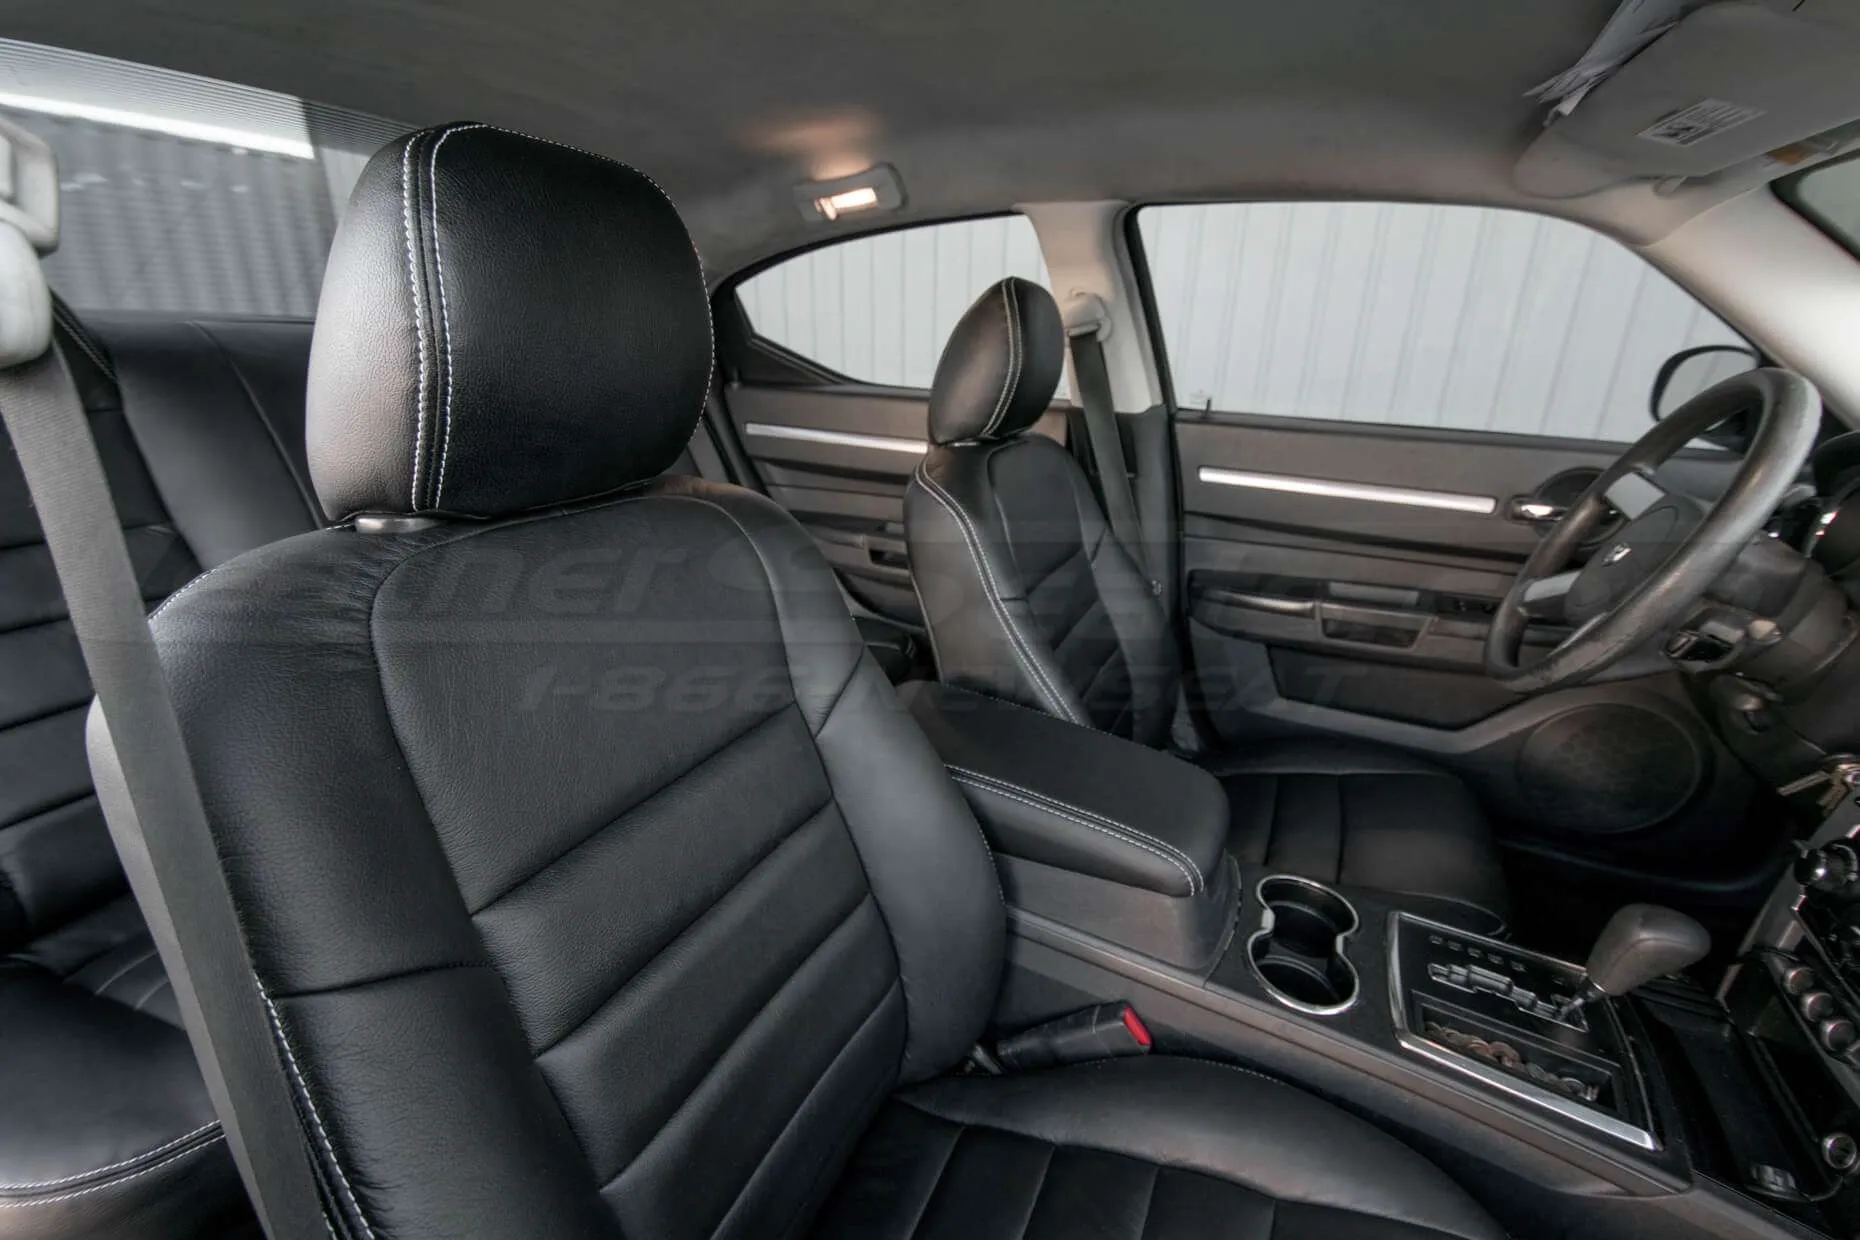 BMW F10 5 SERIES BLACK LEATHER M-SPORT INTERIOR for sale in Co. Meath for  €480 on DoneDeal